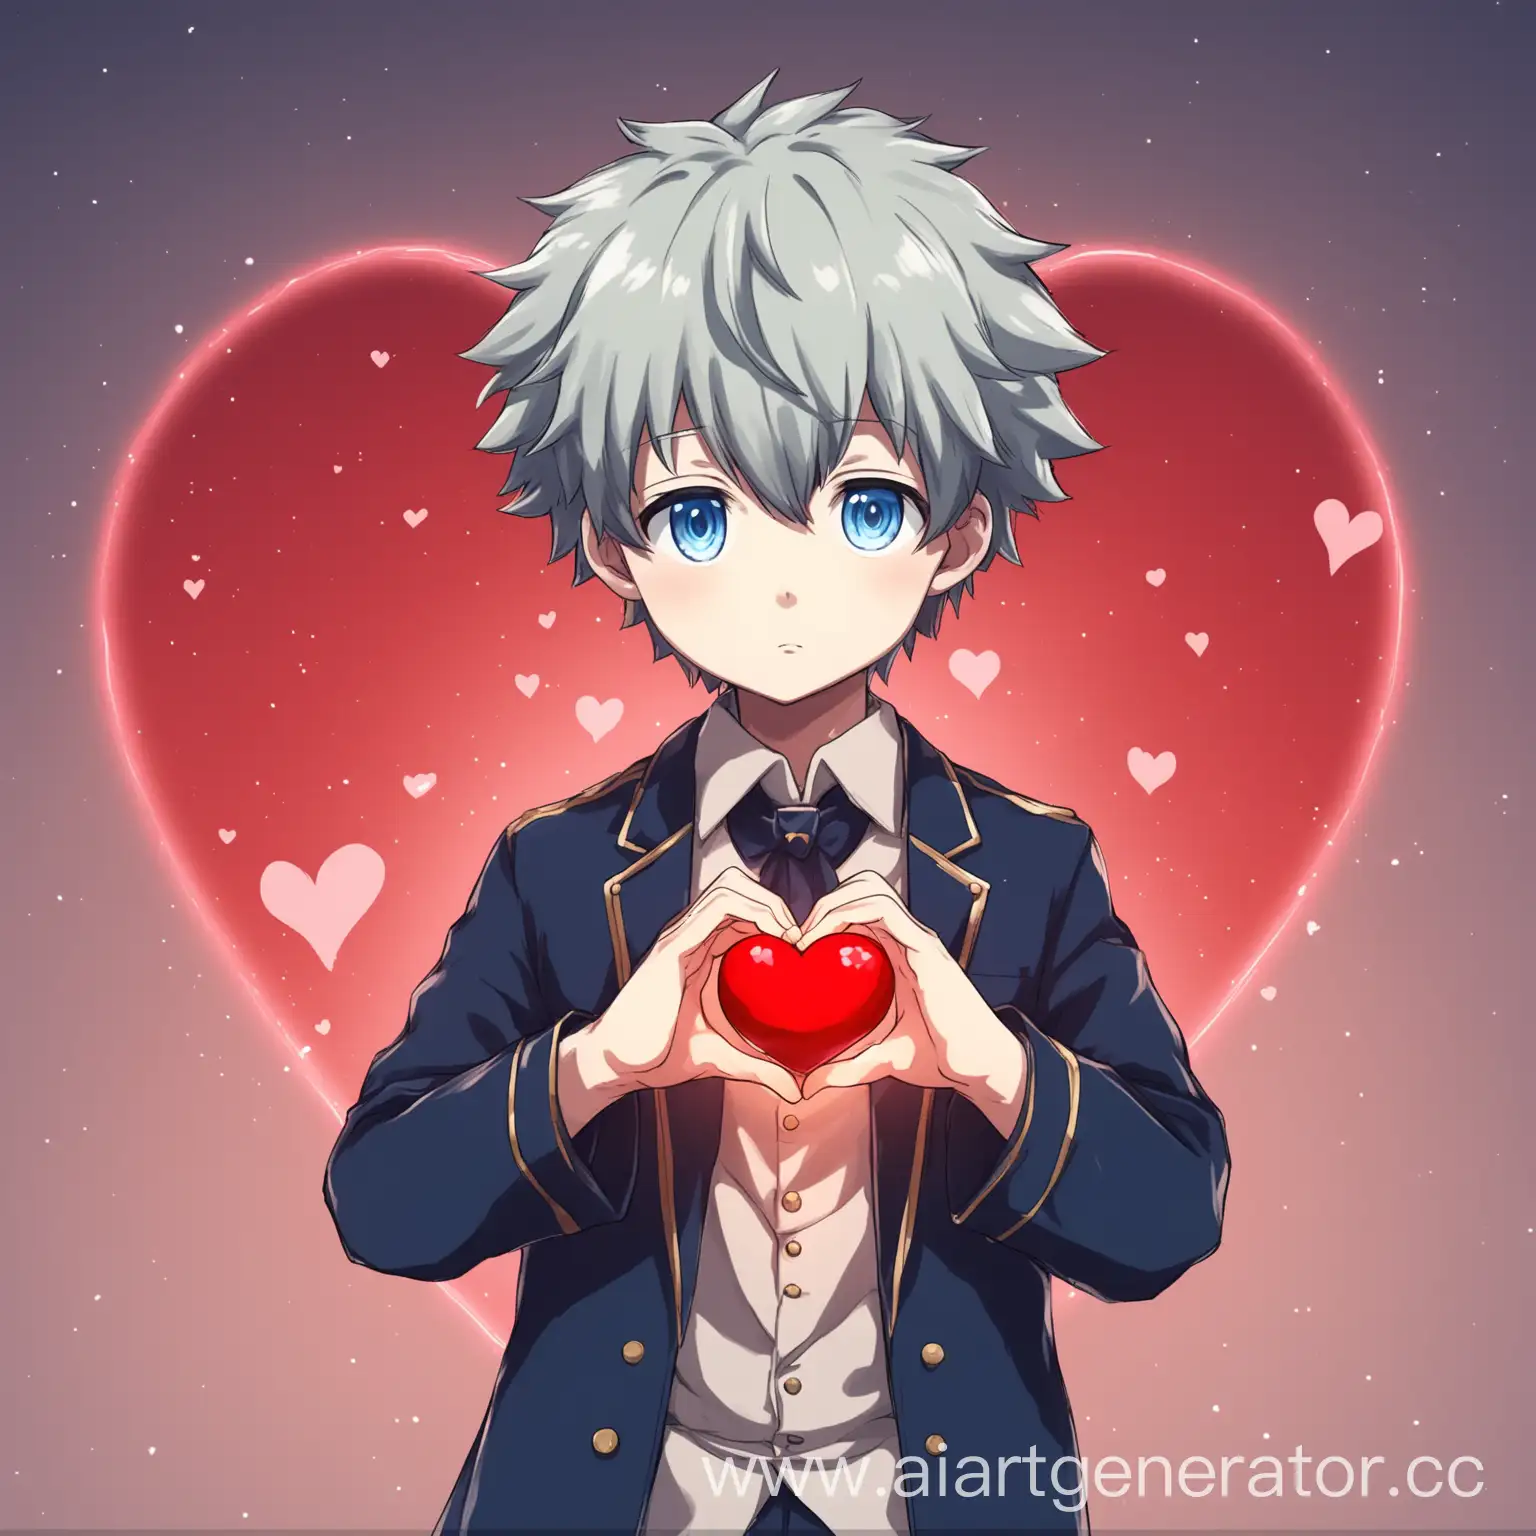 Anime-Character-Sotor-Gyoje-Holding-Heart-Romantic-Gesture-Illustration